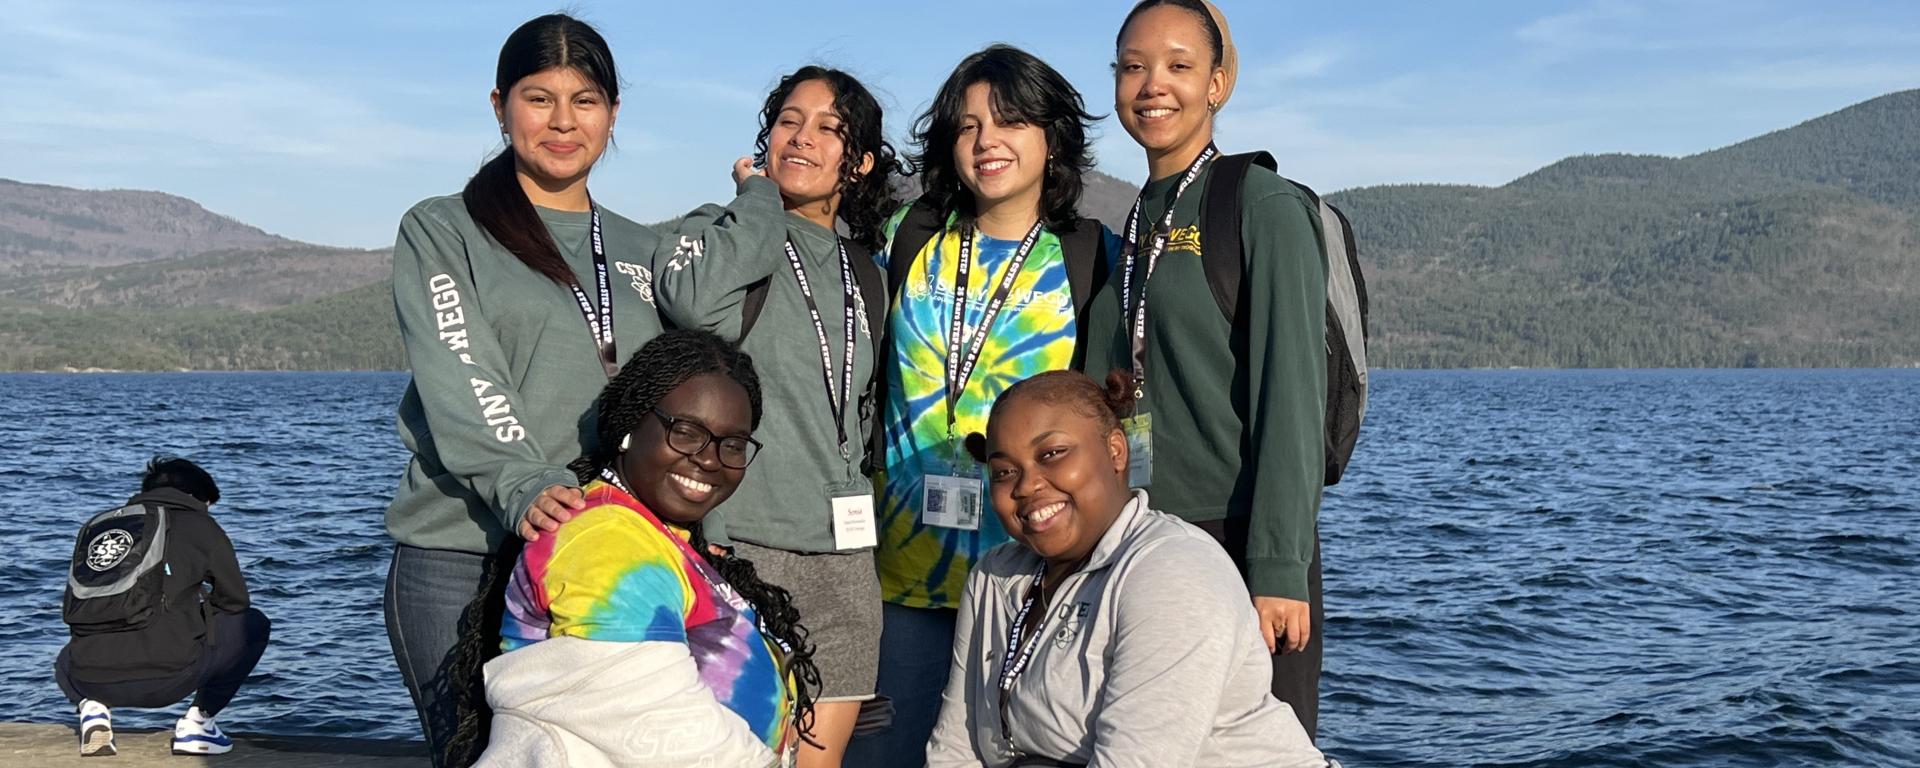 CSTEP students in front of Lake Ontario